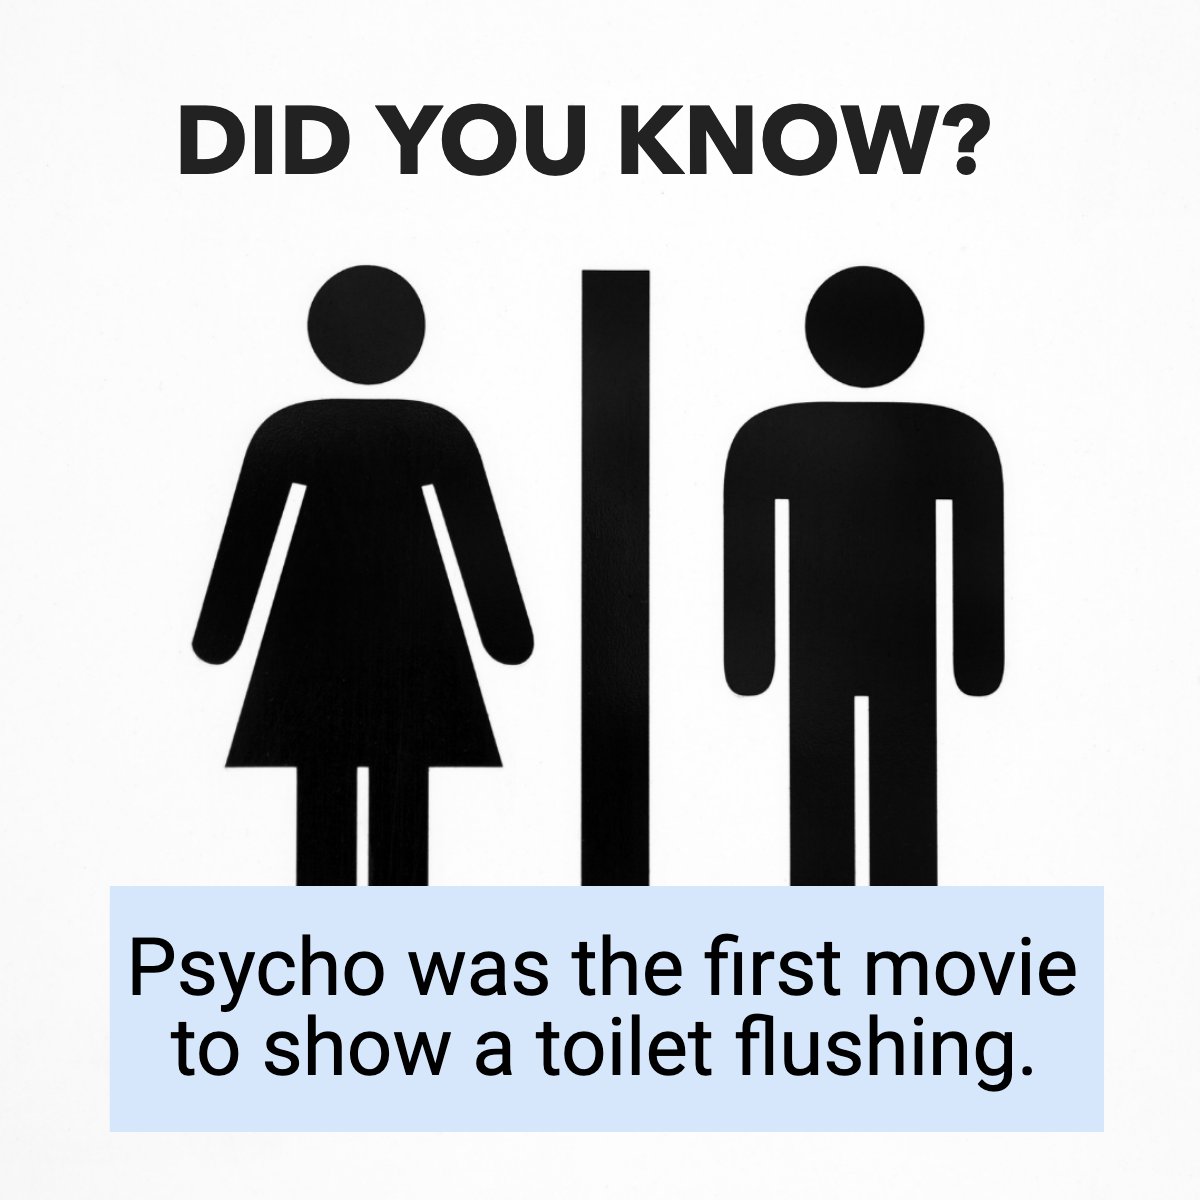 Psycho is an iconic movie that is still considered and viewed as a classic. 

But did you know?

Psycho was the first movie to show a toilet flushing. 

#riscosells #theriscogroup #kwmainline #Uptownliving